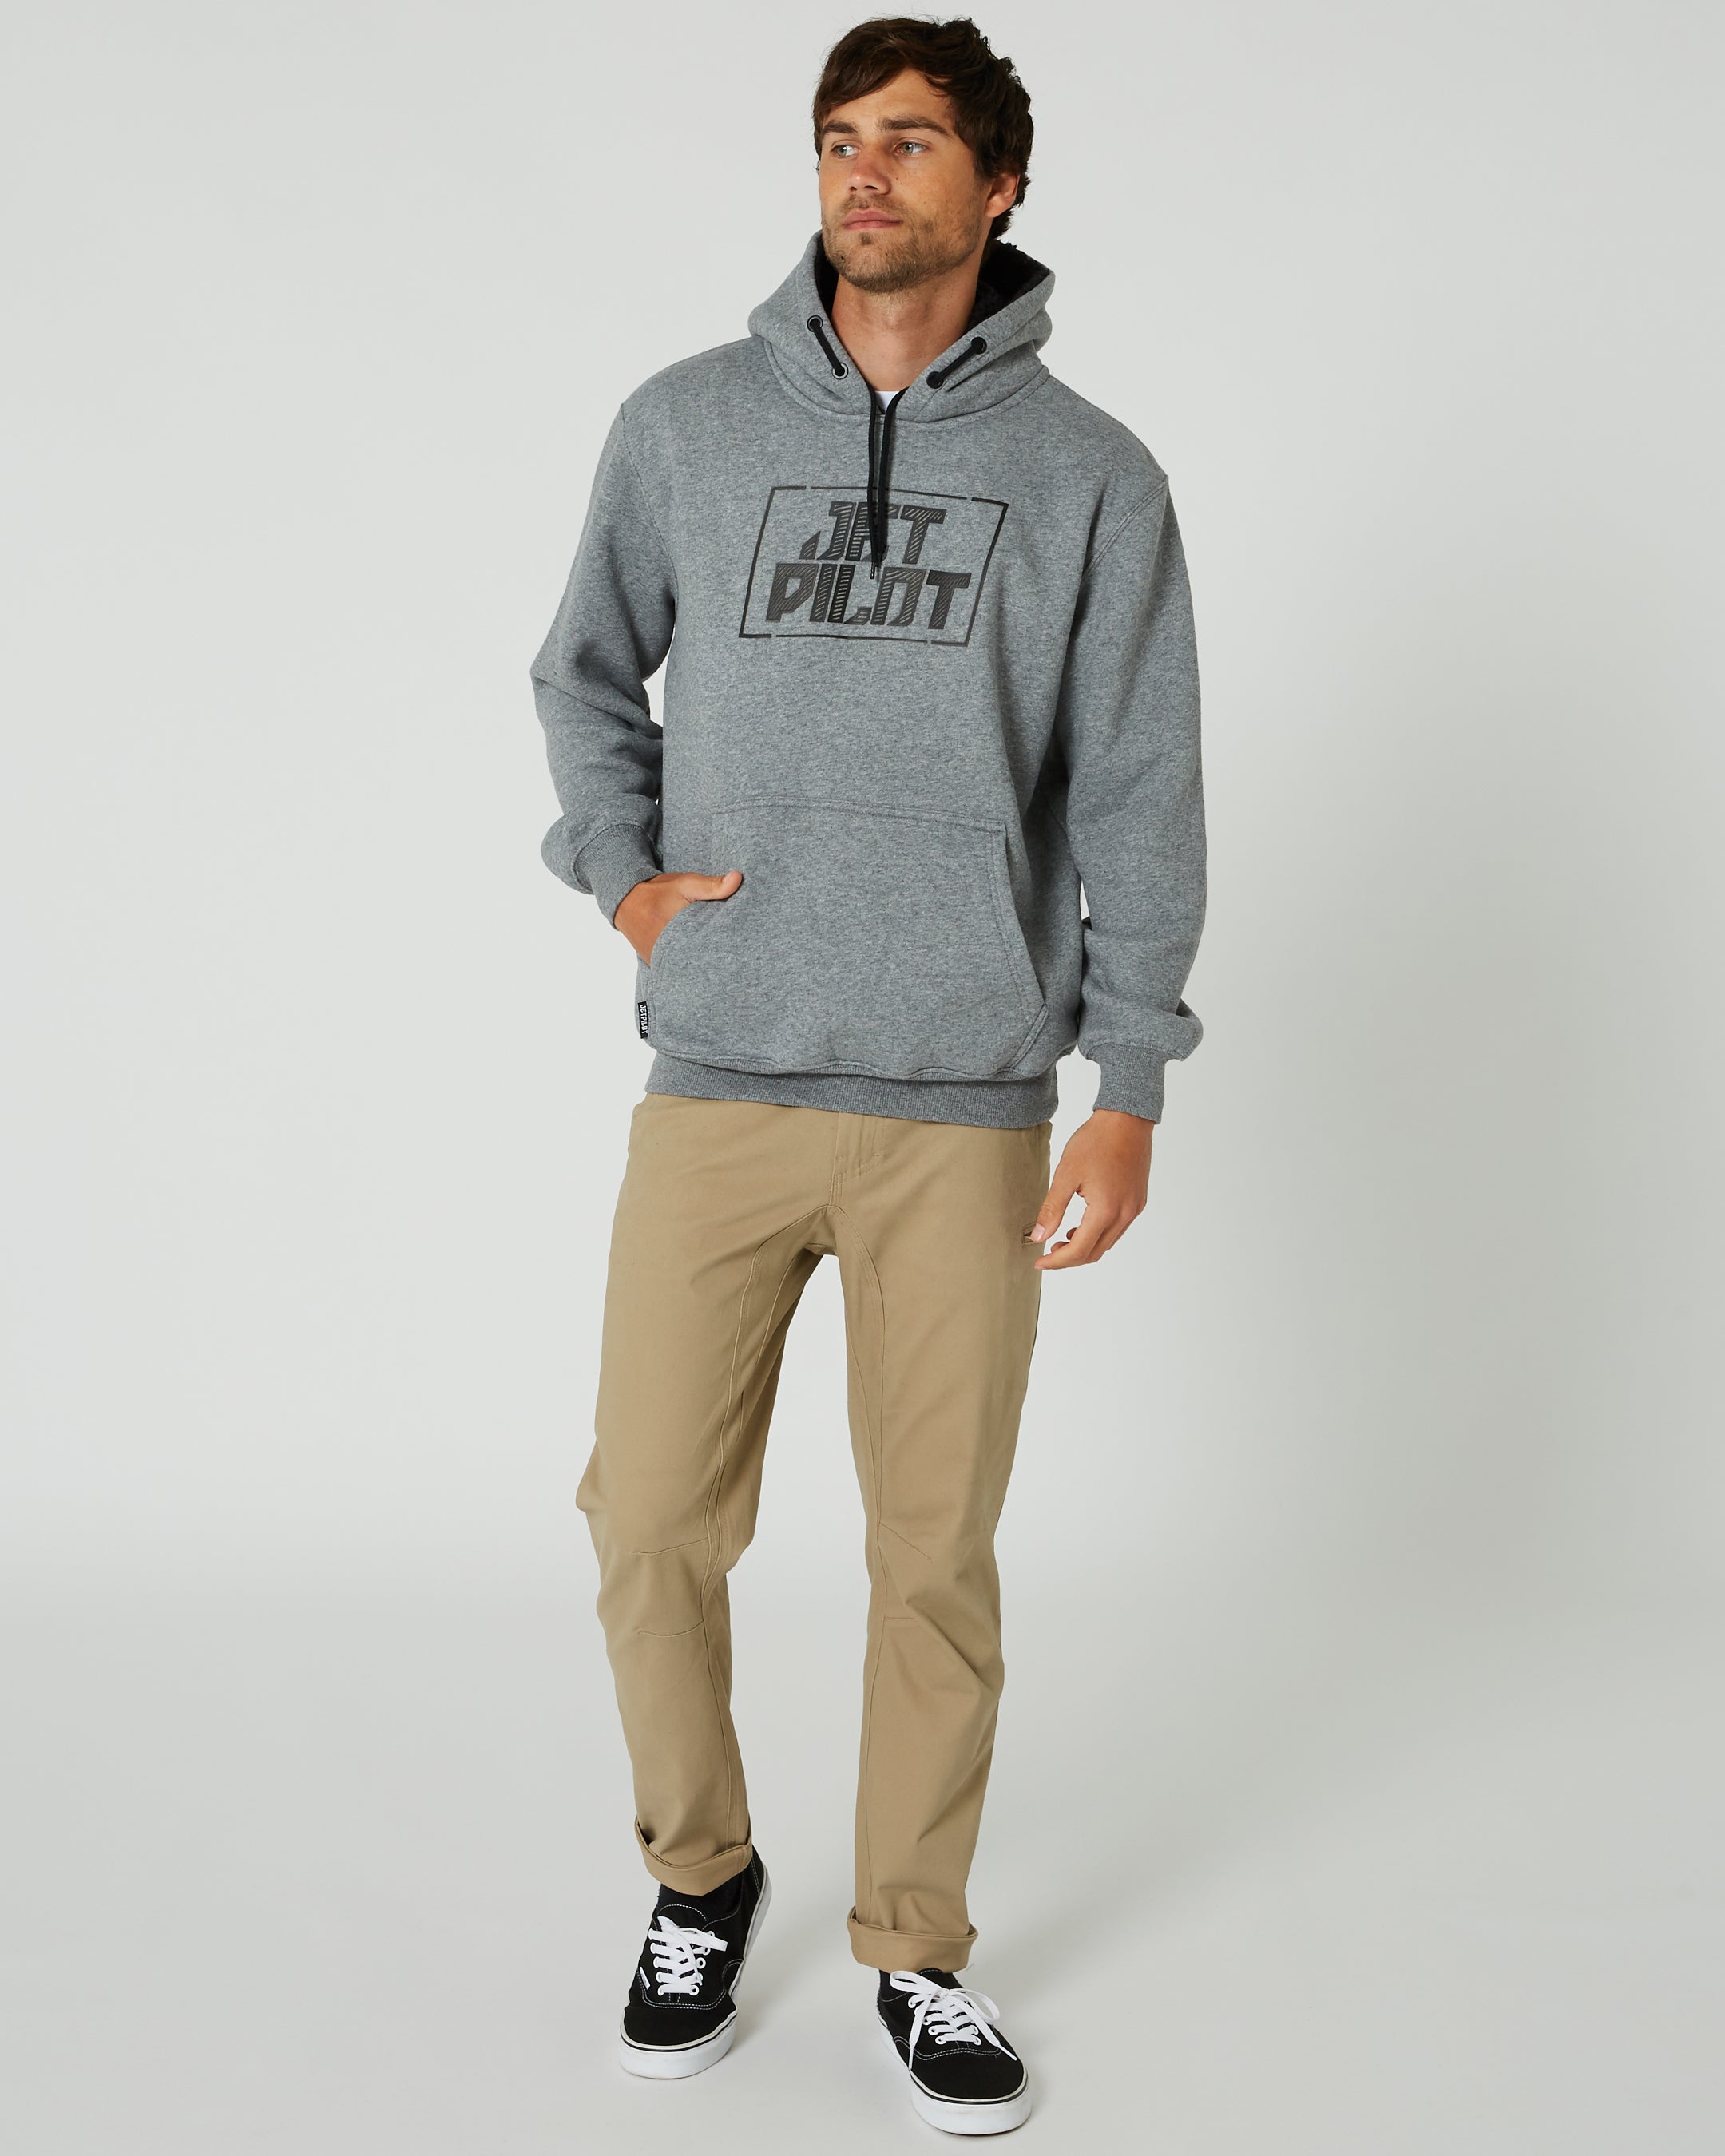 Jetpilot Corp HD Mens Pullover Hoodie - Charcoal 4